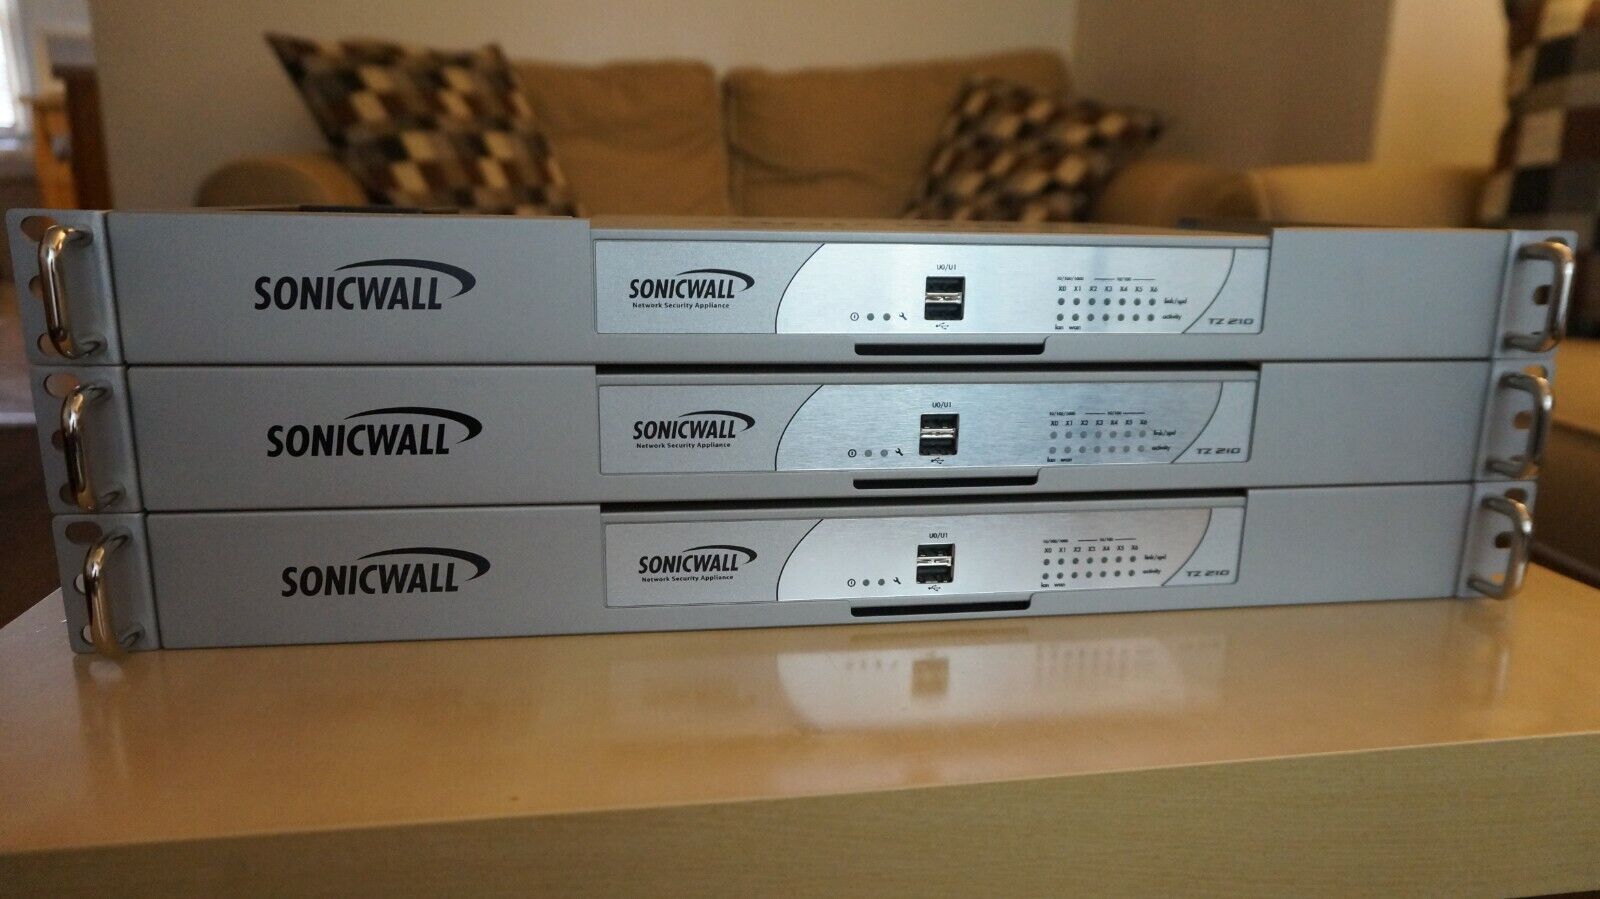 Lot of 3 SonicWALL TZ 210 w/Rack Mount Kit, used in good condition